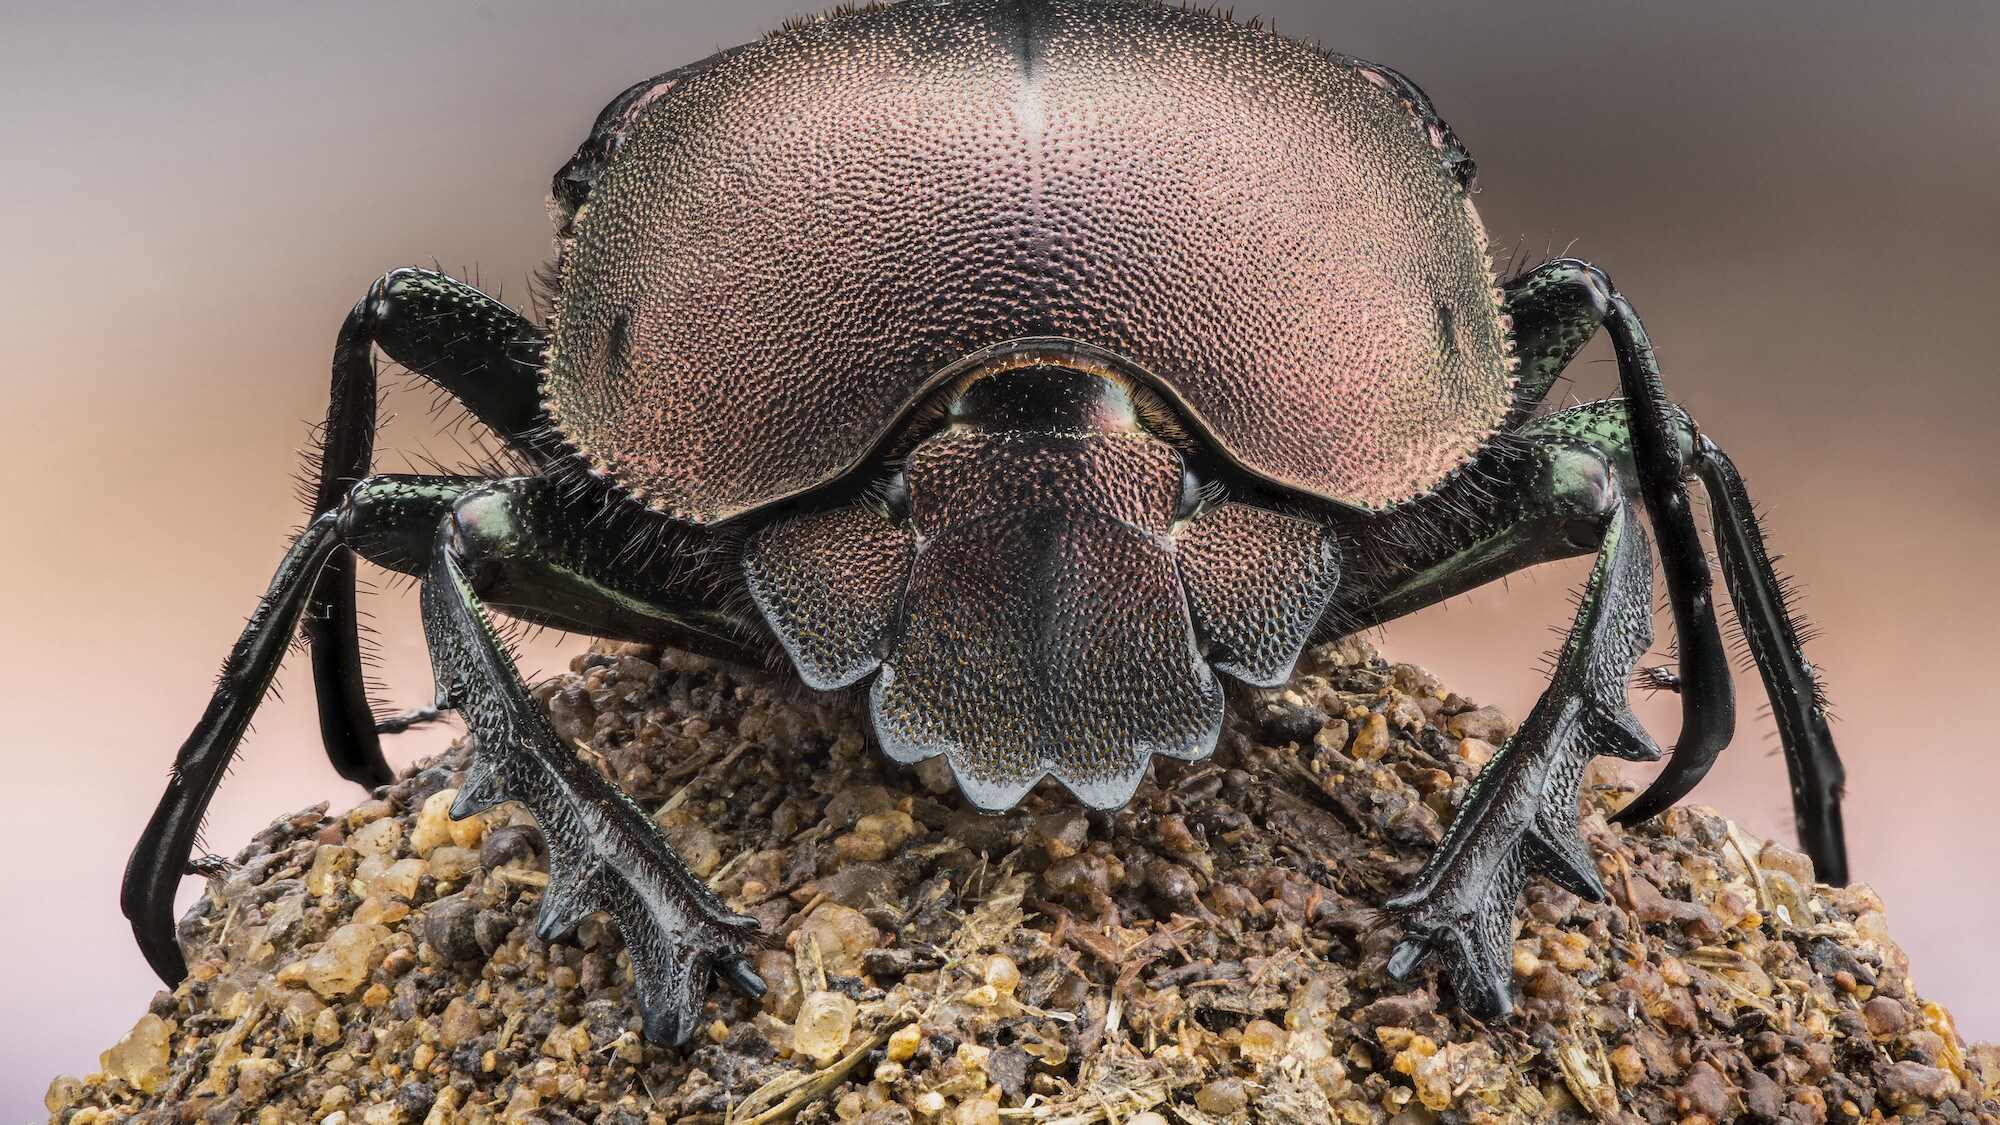 A dung beetle standing on a ball of dung is pictured in South Africa in the "Land of Giants" episode of "A Real Bug's Life." (National Geographic/Chris Collingridge)